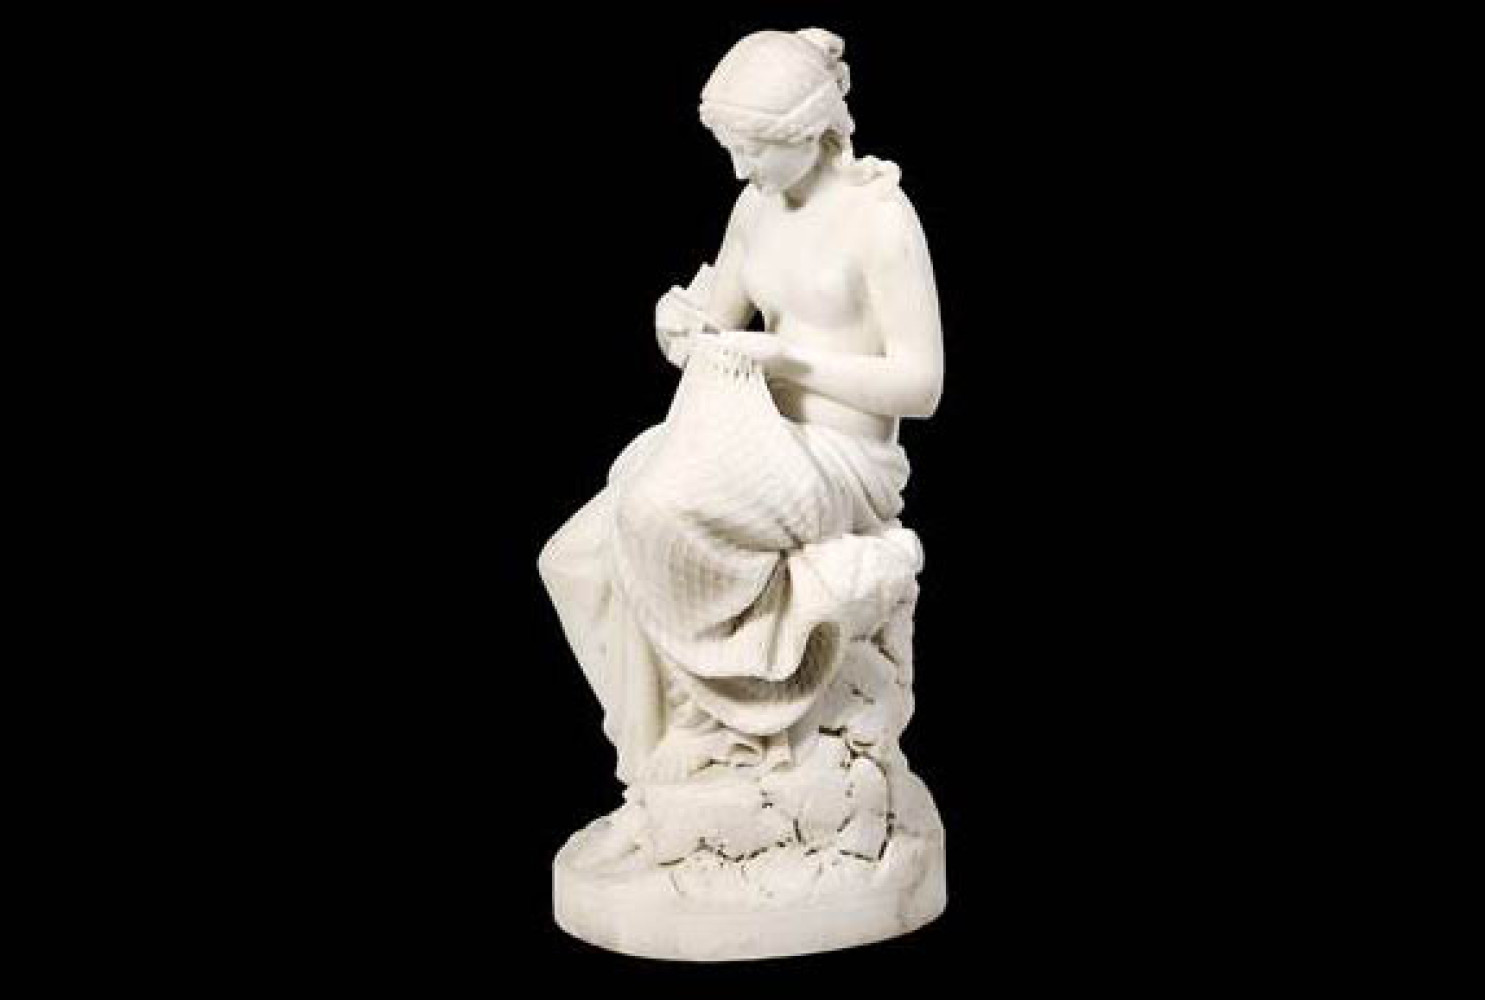 Mending the Nets, 1866, by Chauncey Ives (American, 1810-1894); Marble; 30x15x10 inches; Museum purchase with funds provided by the William B. McGuire Jr., Family Foundation (2016.008)
